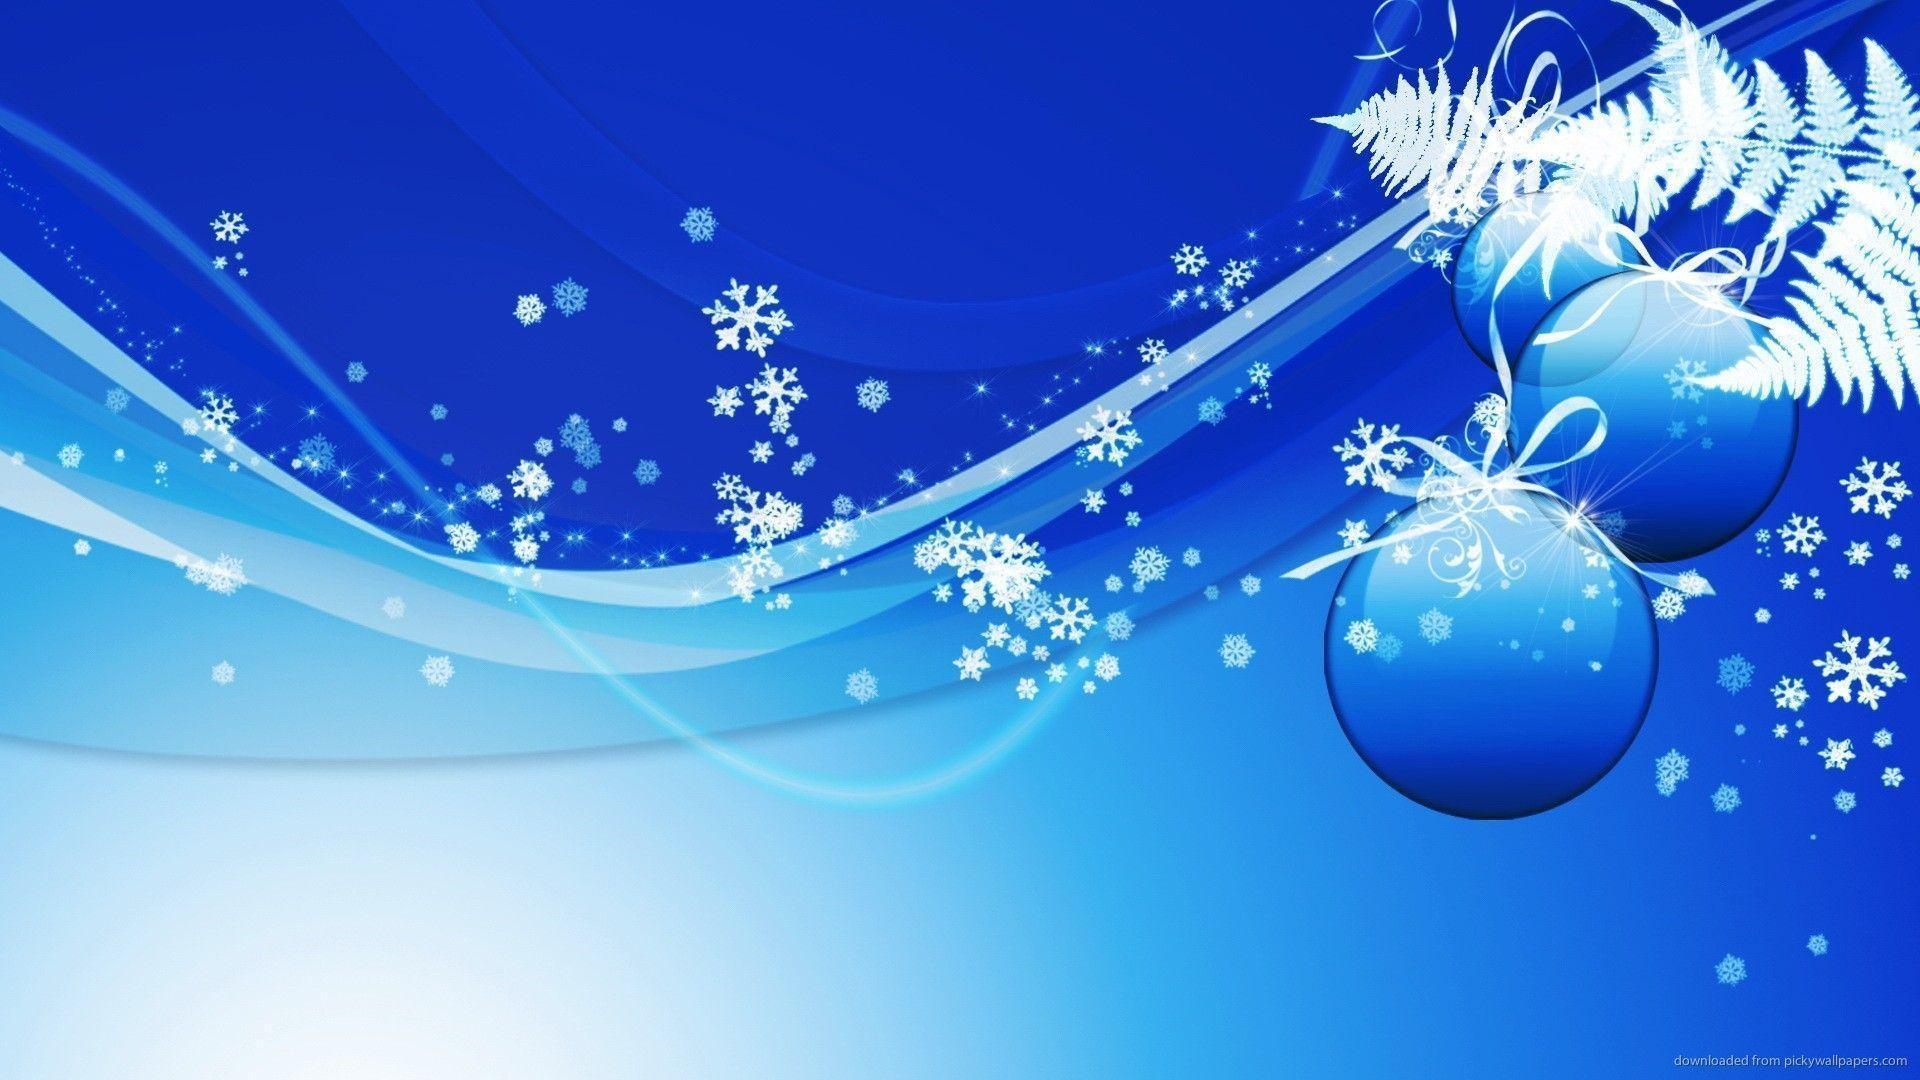 Christmas Background Wallpaper 31 top image 406377 High